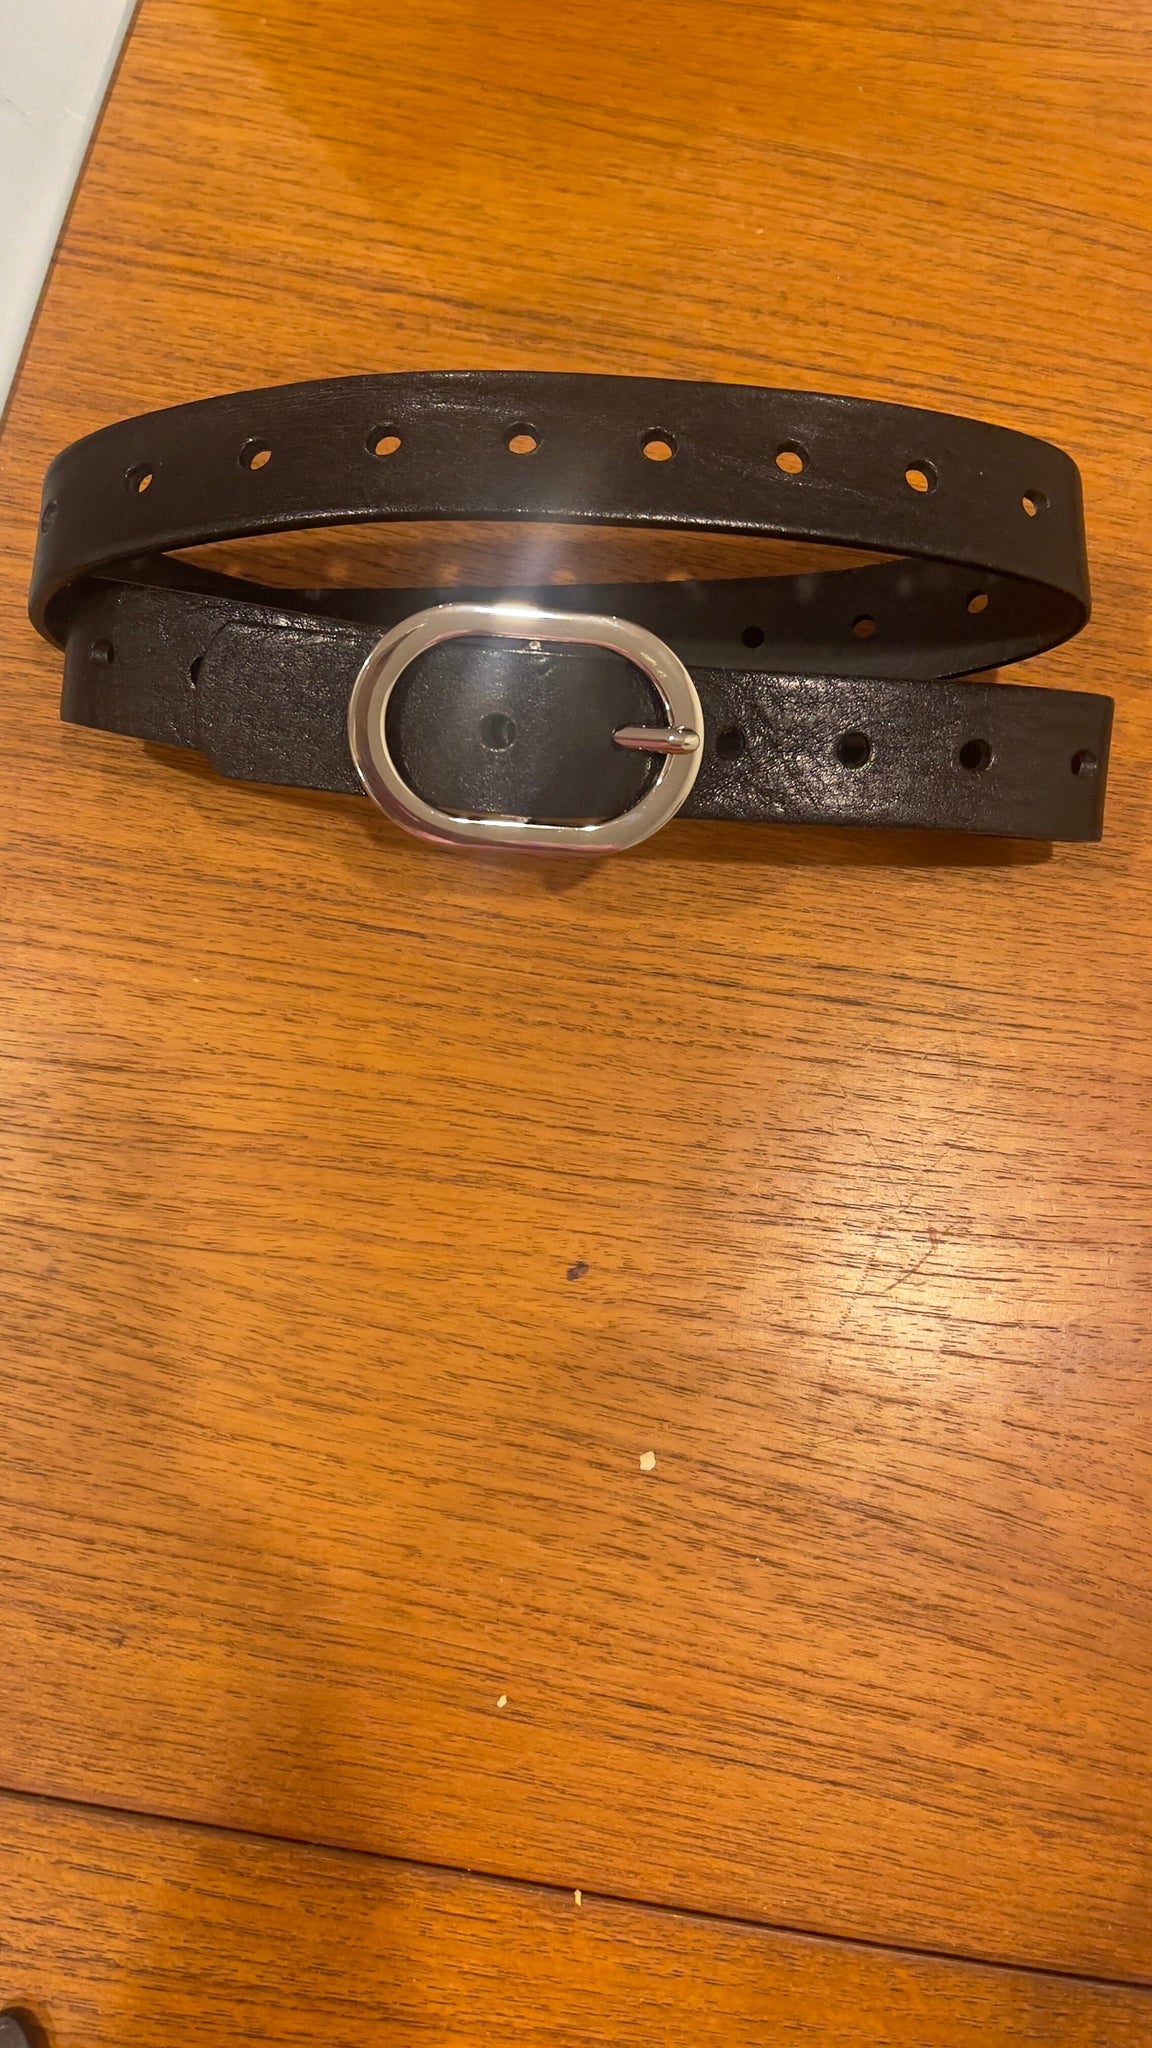 THIN SMALL OVAL BUCKLE LEATHER BROWN BELT Belt Landes S Black 